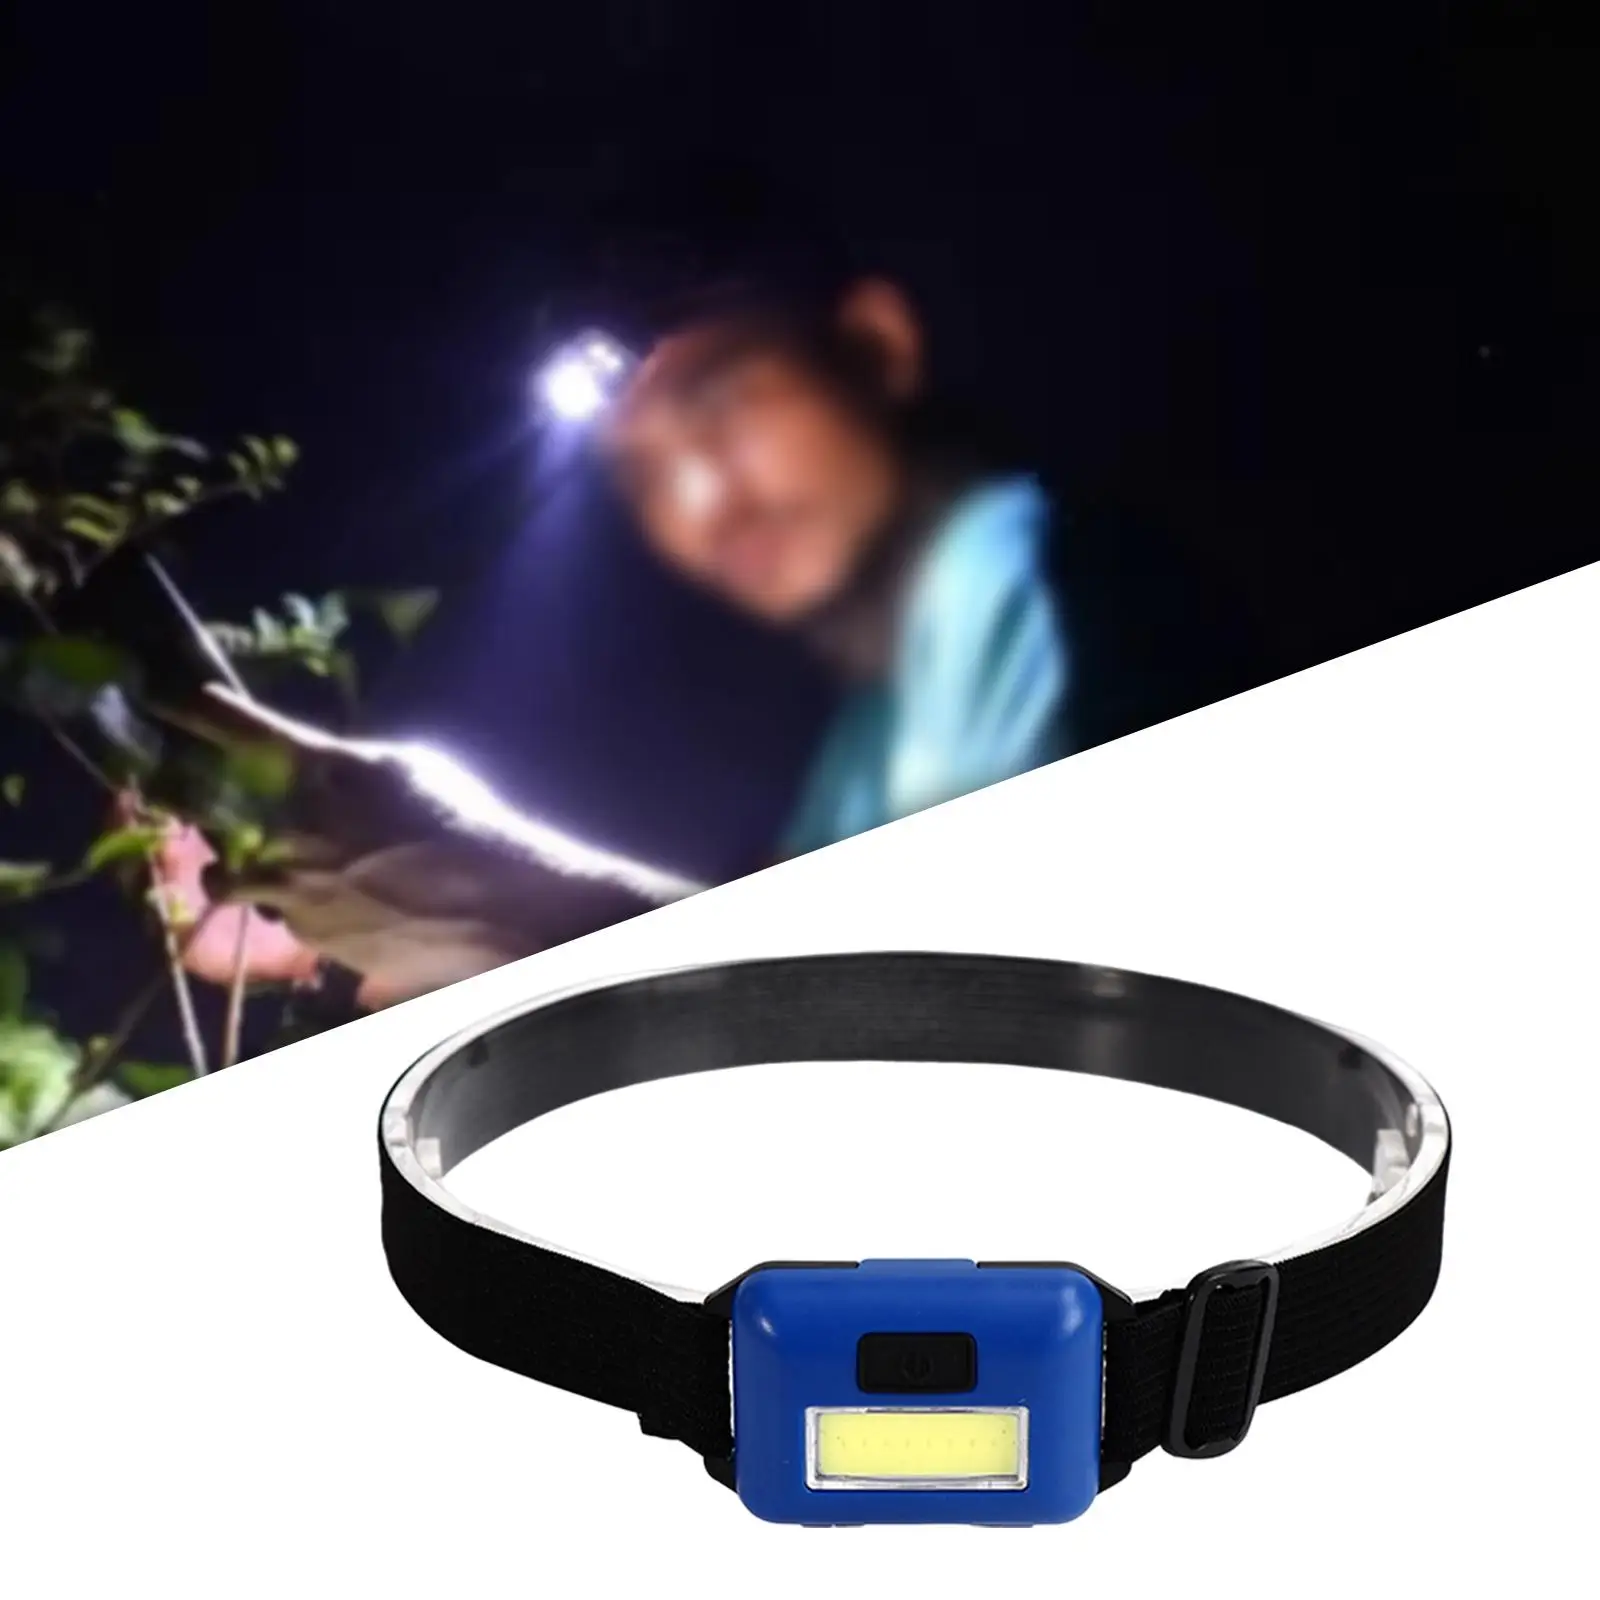 Small LED Headlamp flashlights Battery Powered Lightweight Elastic Head Band Light for Riding Repair Fishing Camping Adventure